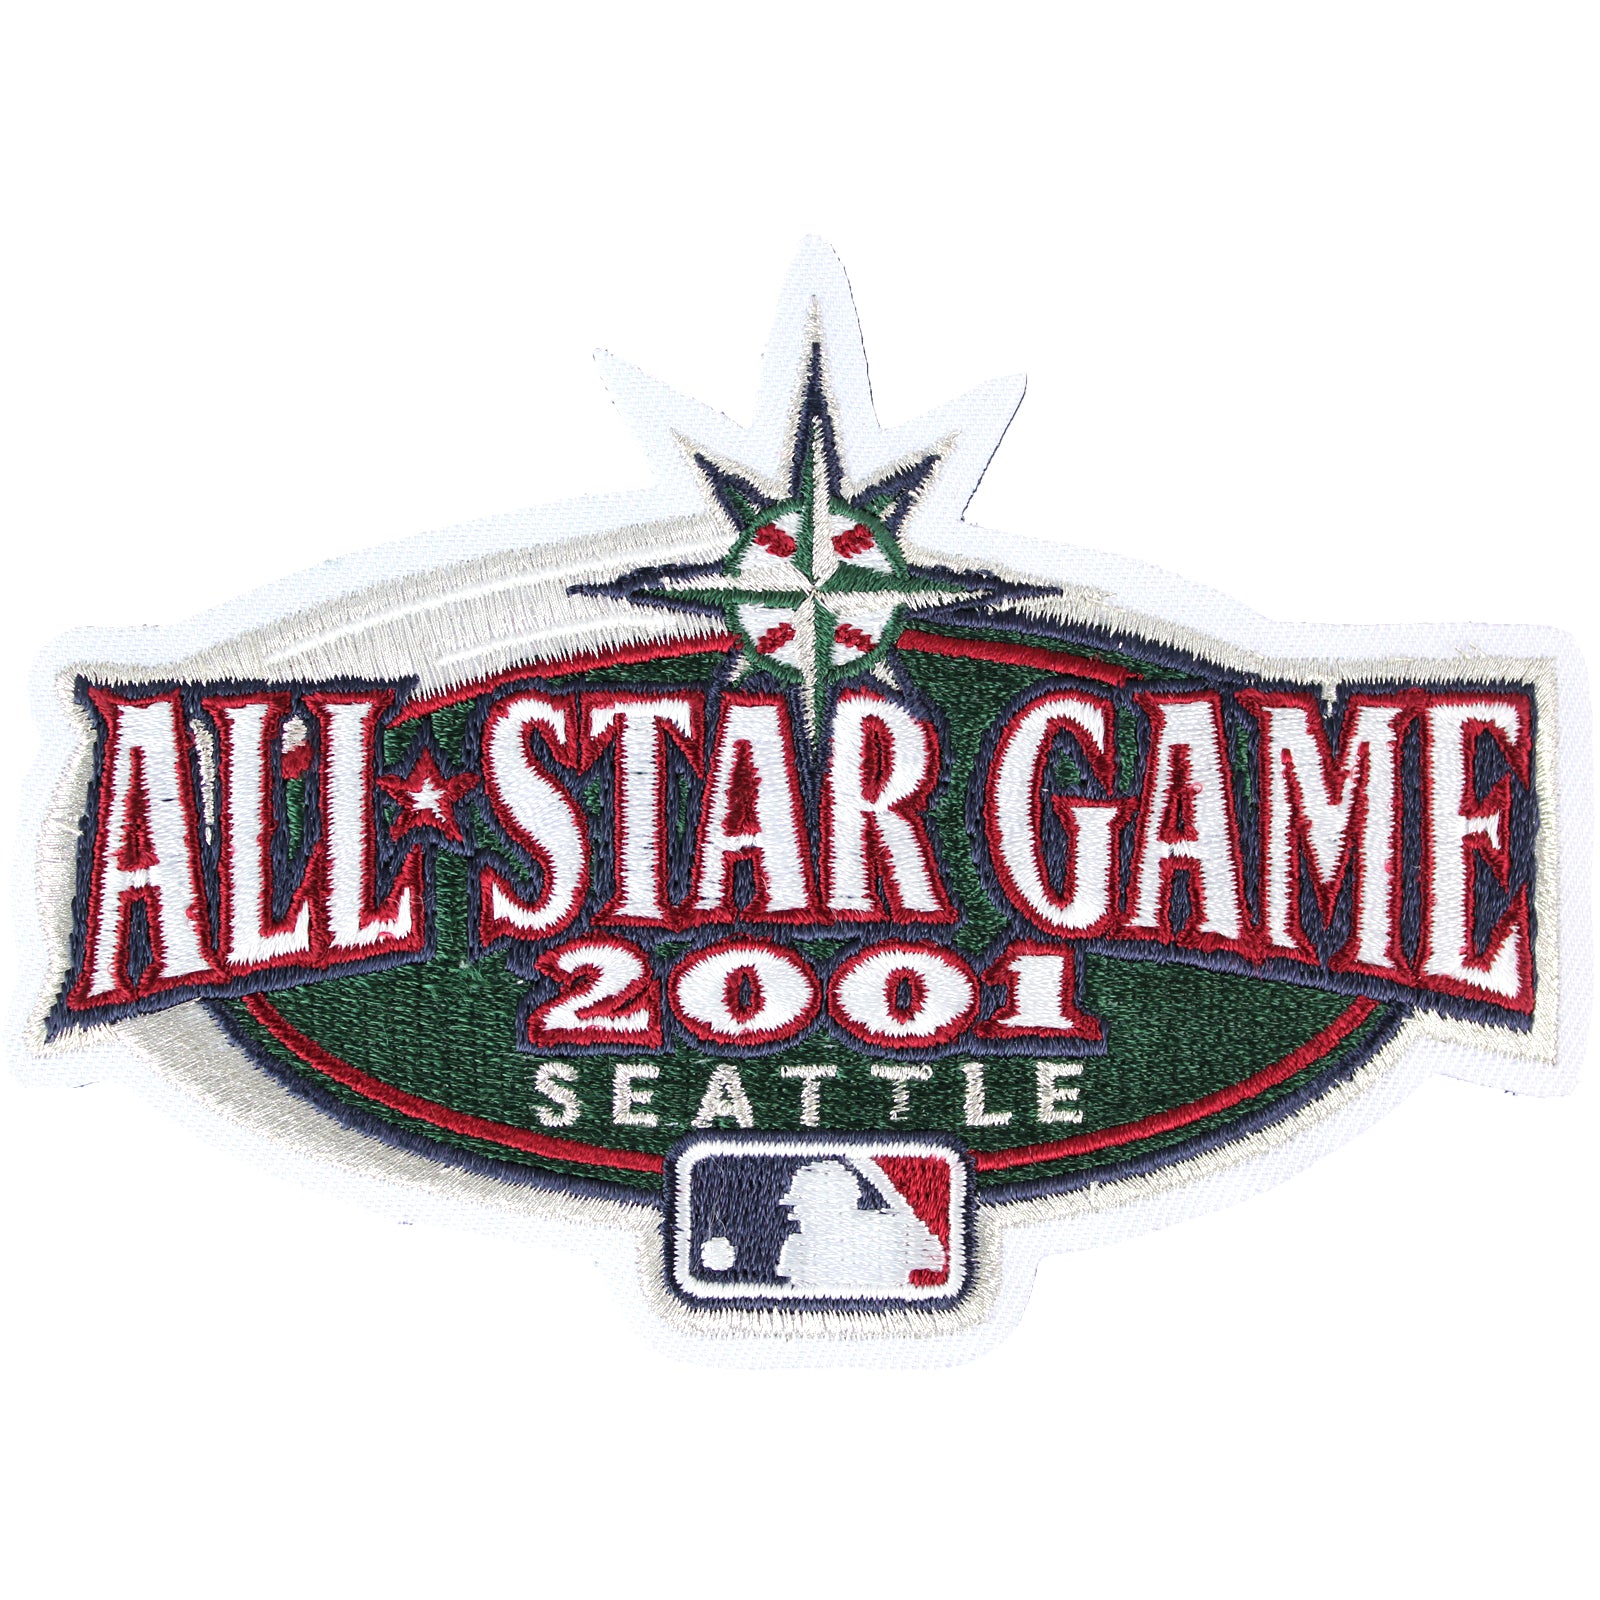 2001 MLB All Star Game Jersey Patch Seattle Mariners – Patch Collection